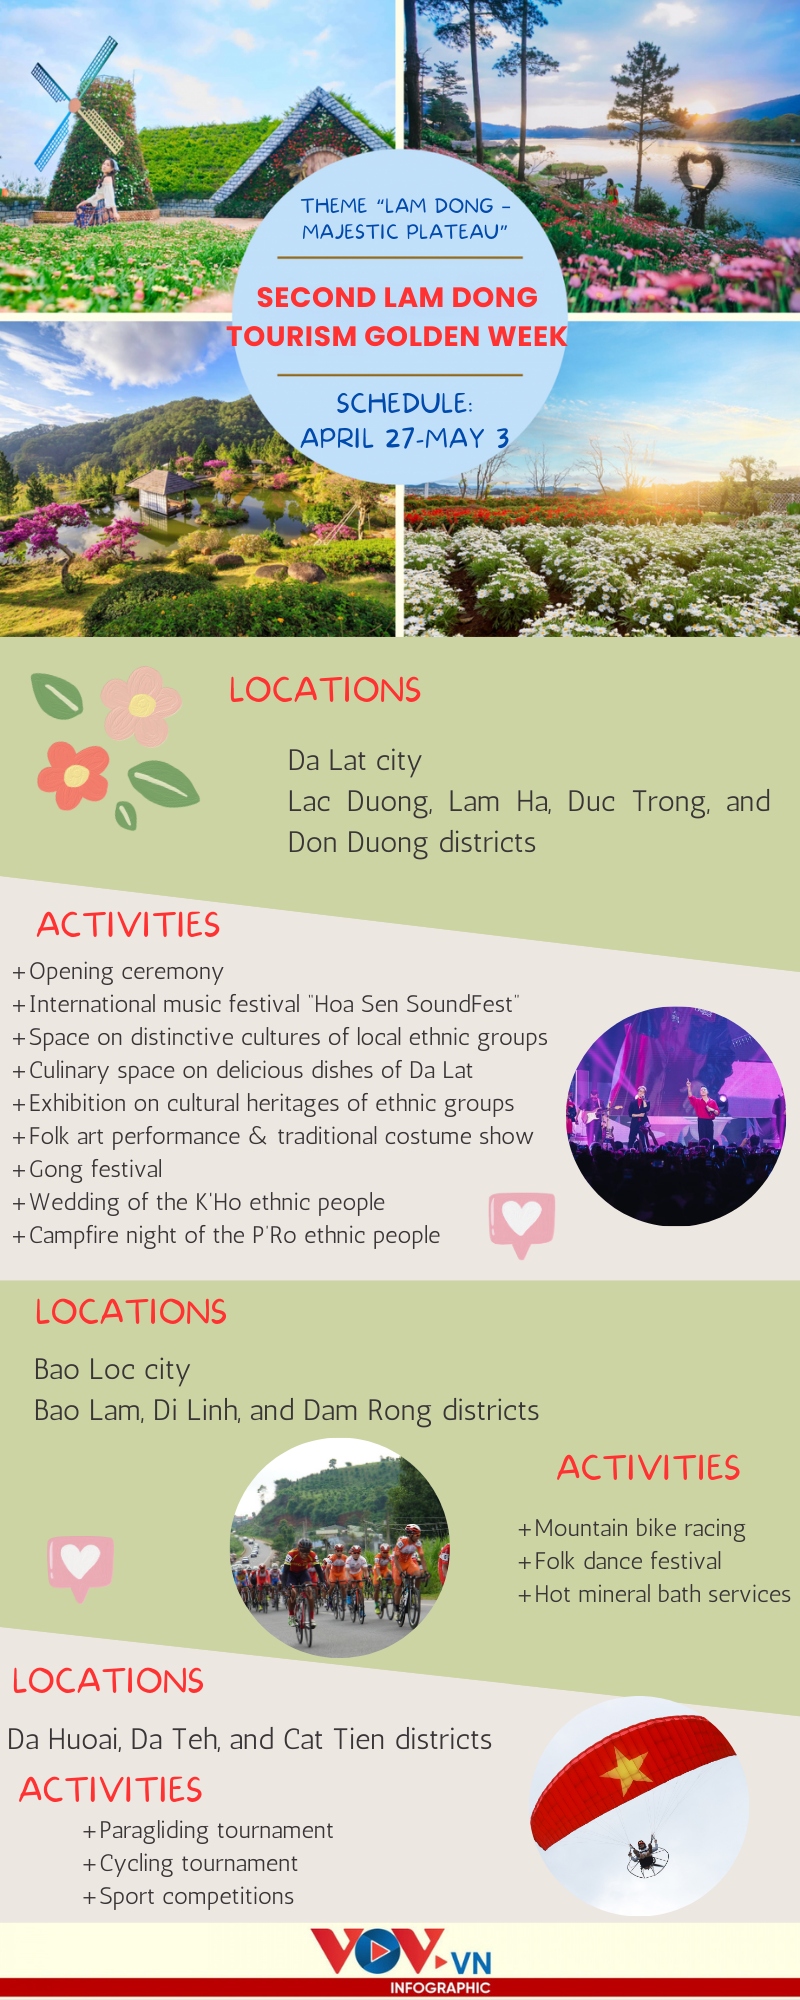 lam dong tourism week offers enjoyable experiences picture 1